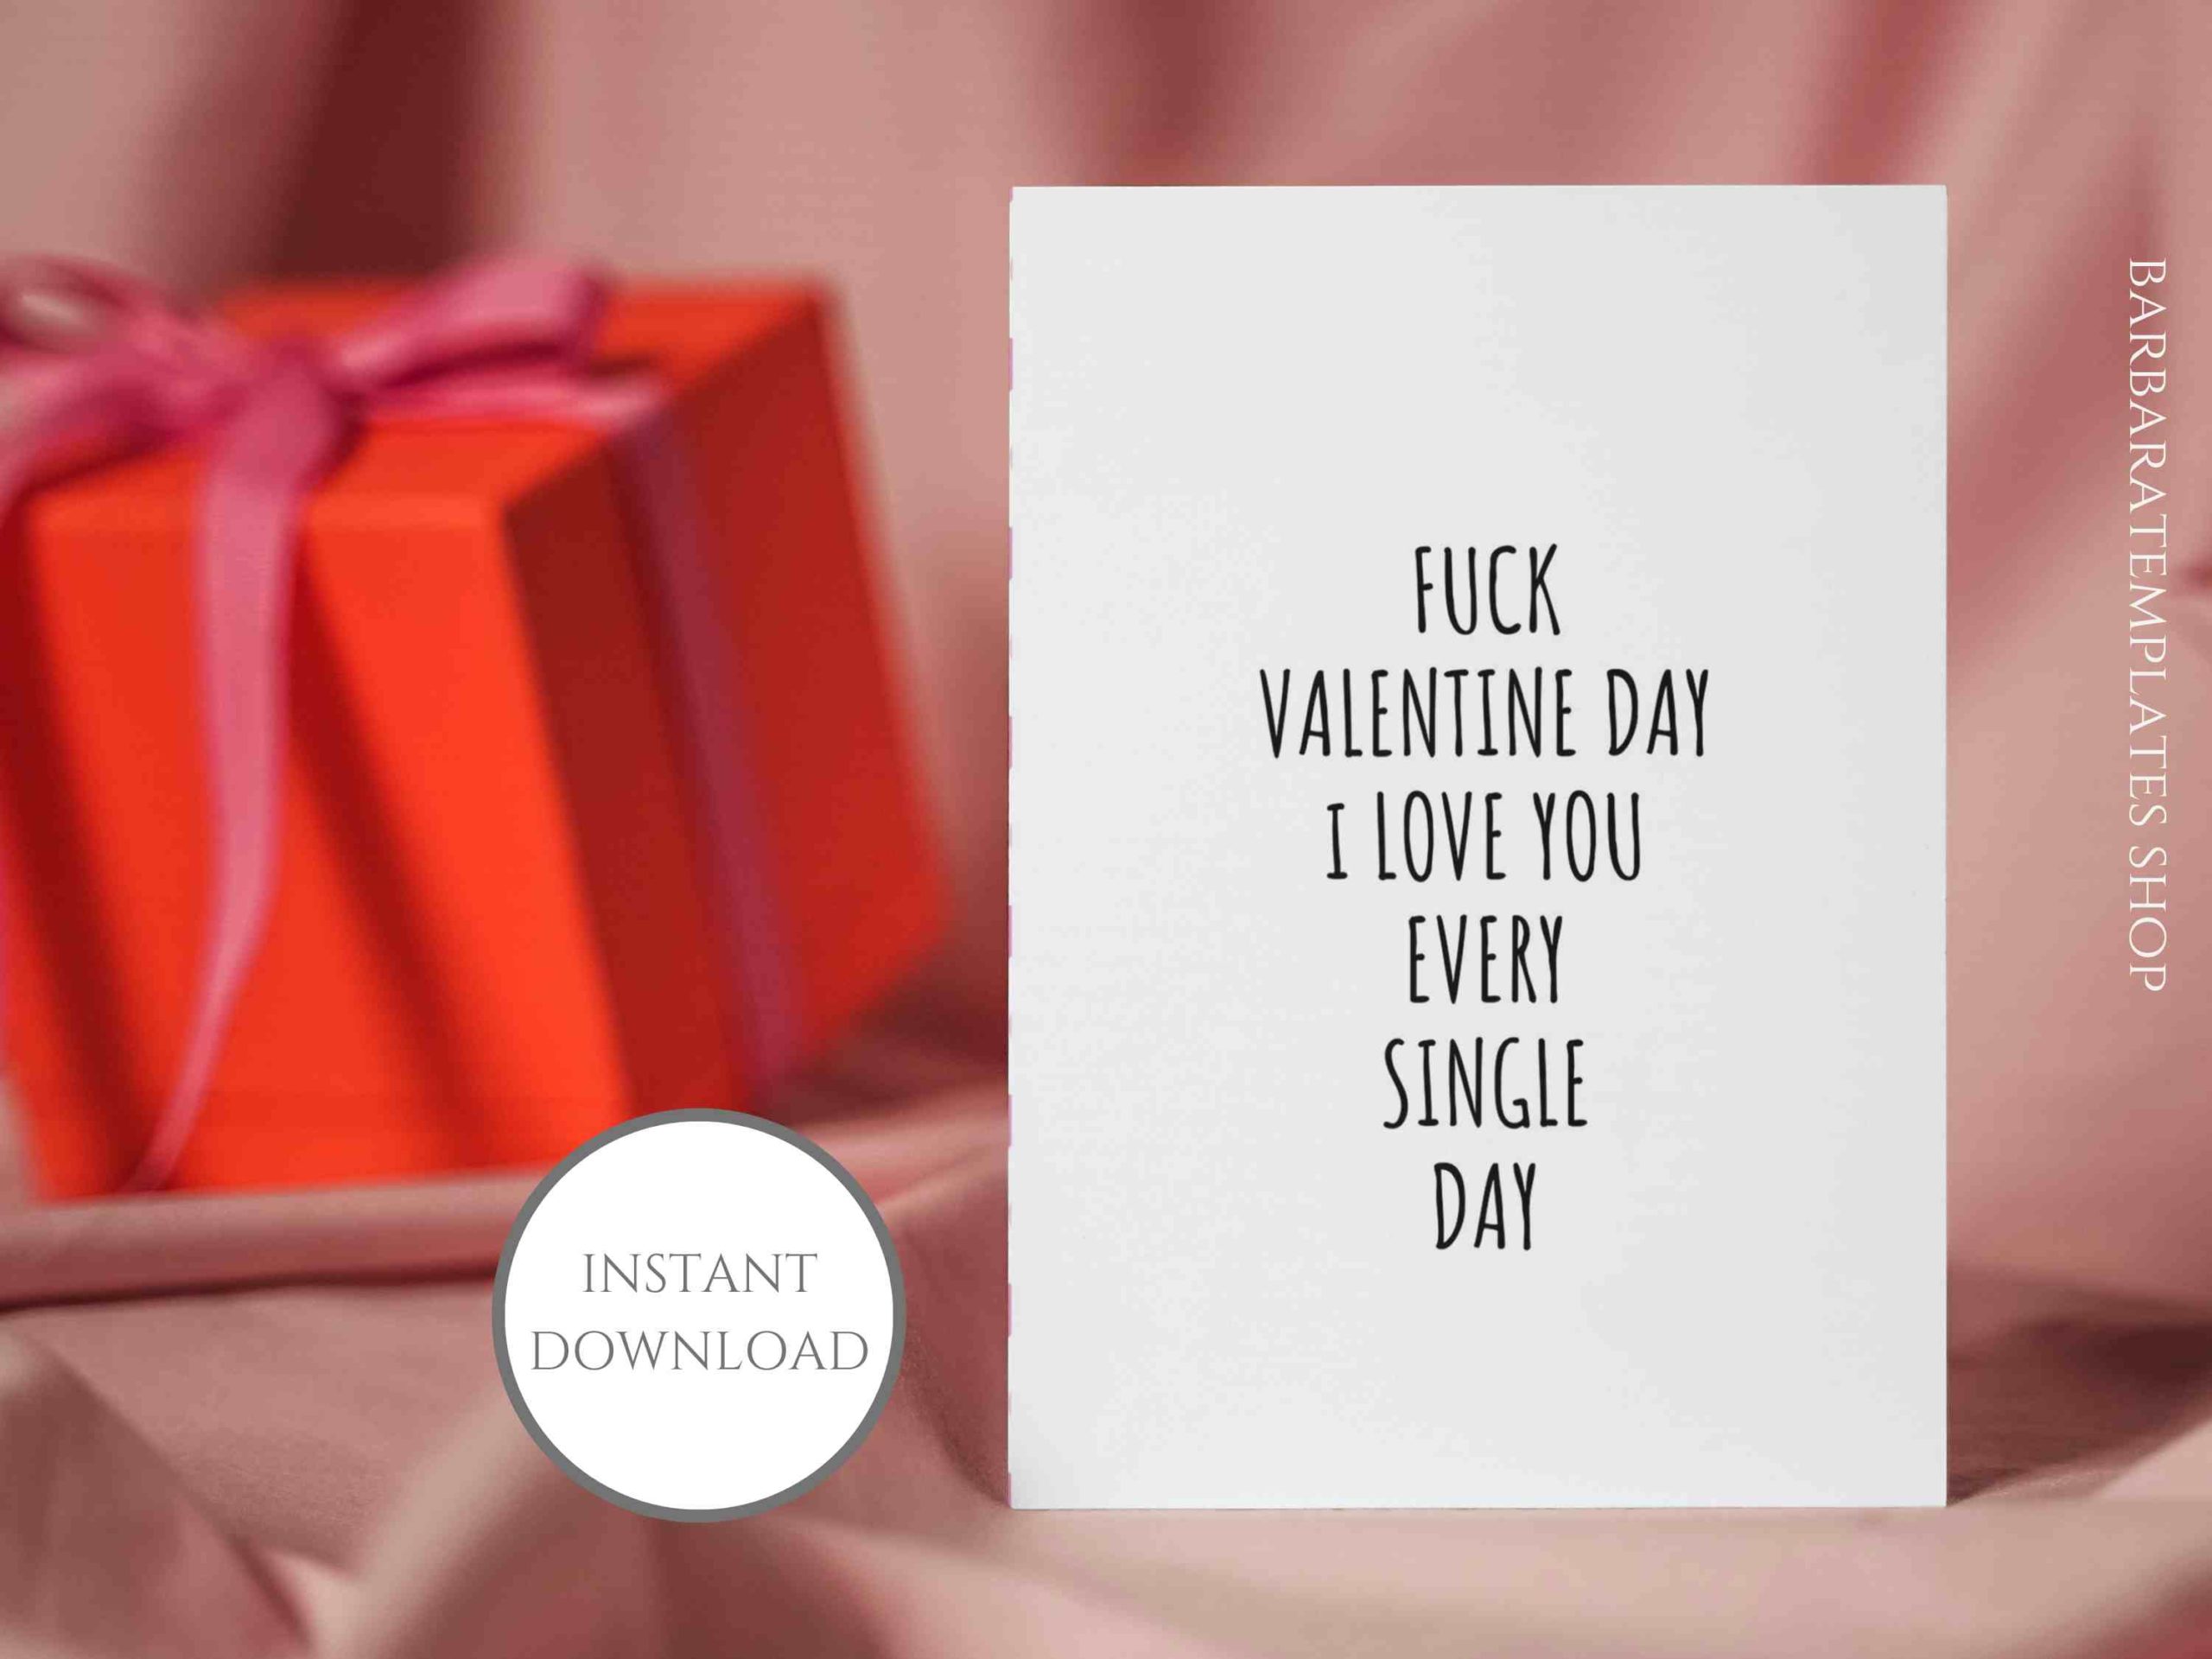 Fuck Valentine Day I Love You Every Single Day Pink Valentine Card